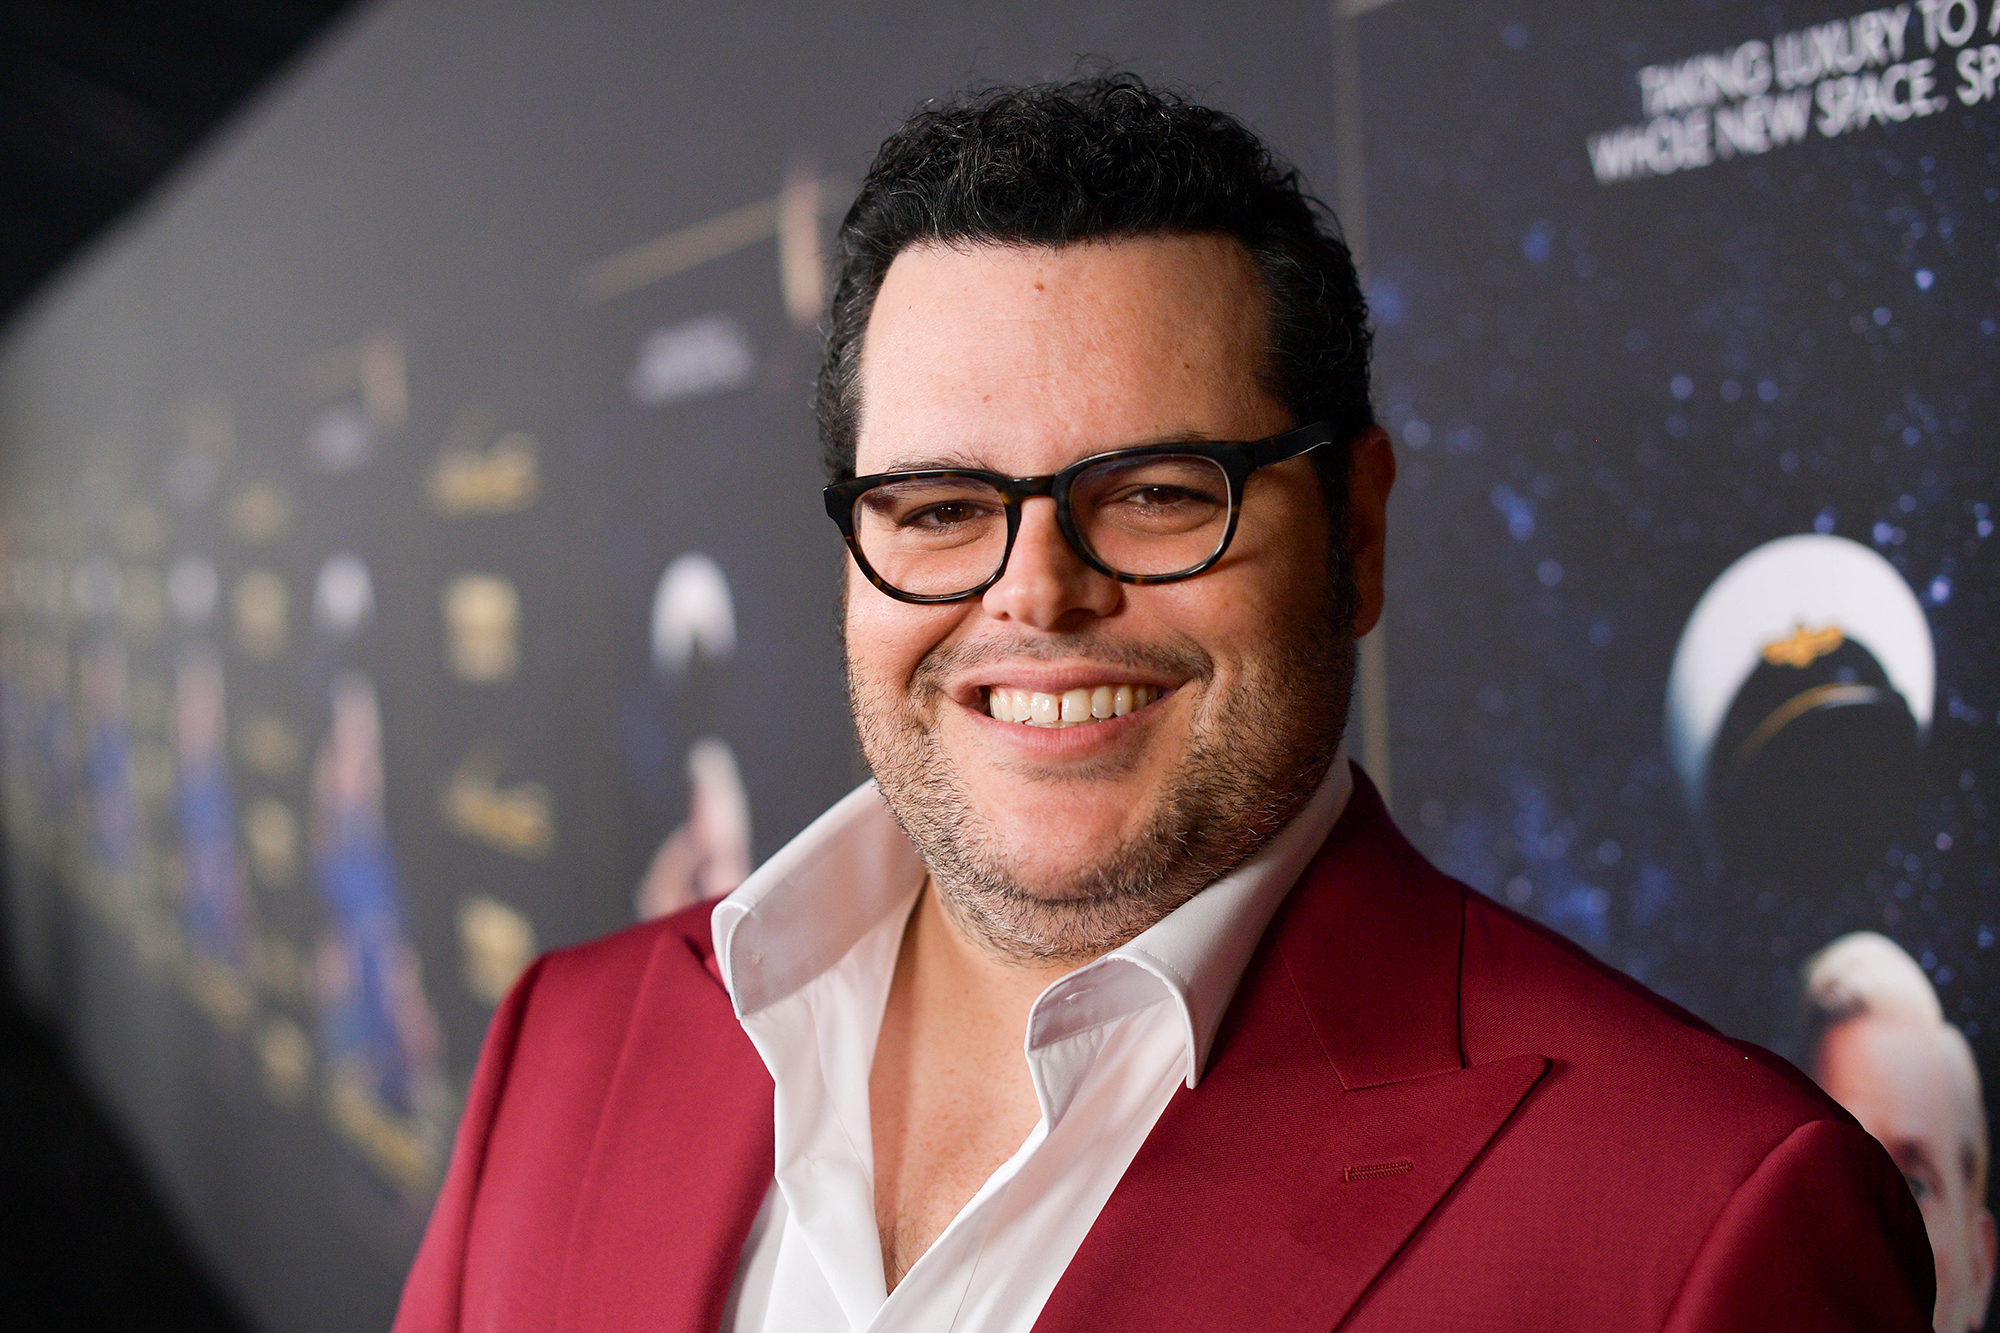 Josh Gad. He relies too much on his cutesy annoying voice, and his characters invariably make awkward statements that drag on longer than they need to in order to increase the awkward level. Maybe the latter part comes down to the writers or directors, but it's always his character for some reason...Overall, I think he has little range.